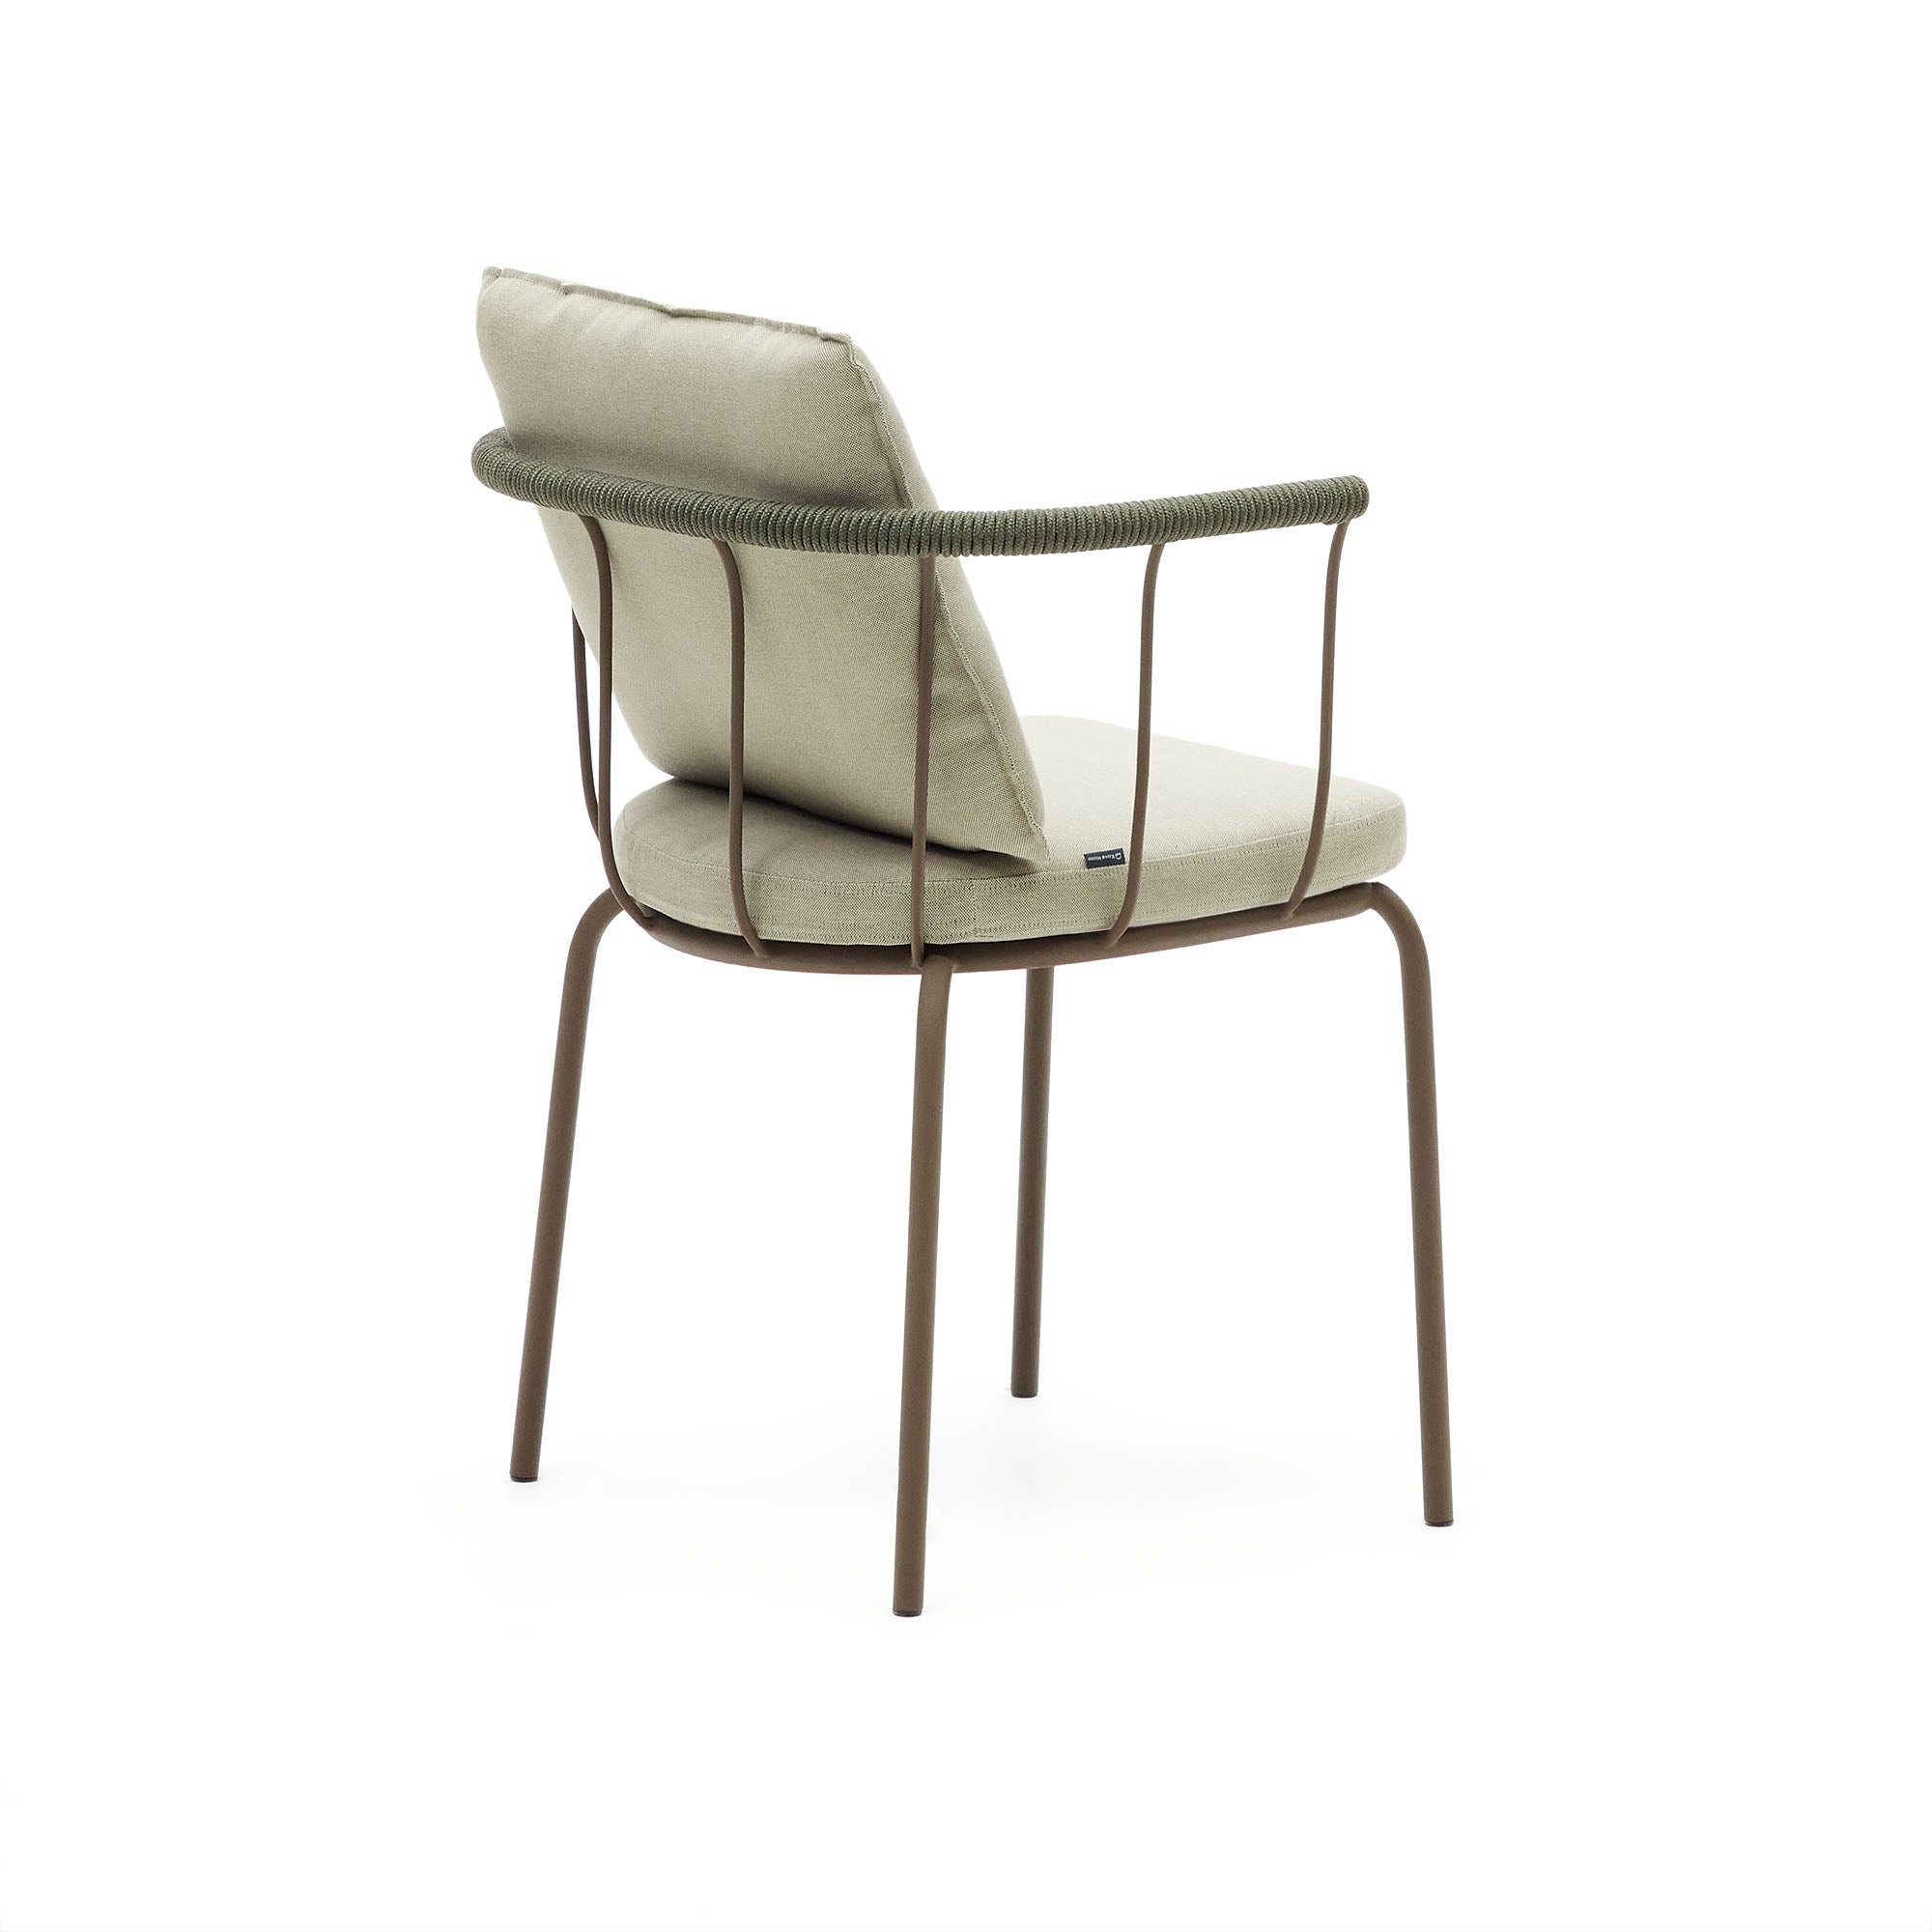 Salguer stackable chair in cord and steel with a brown painted finish